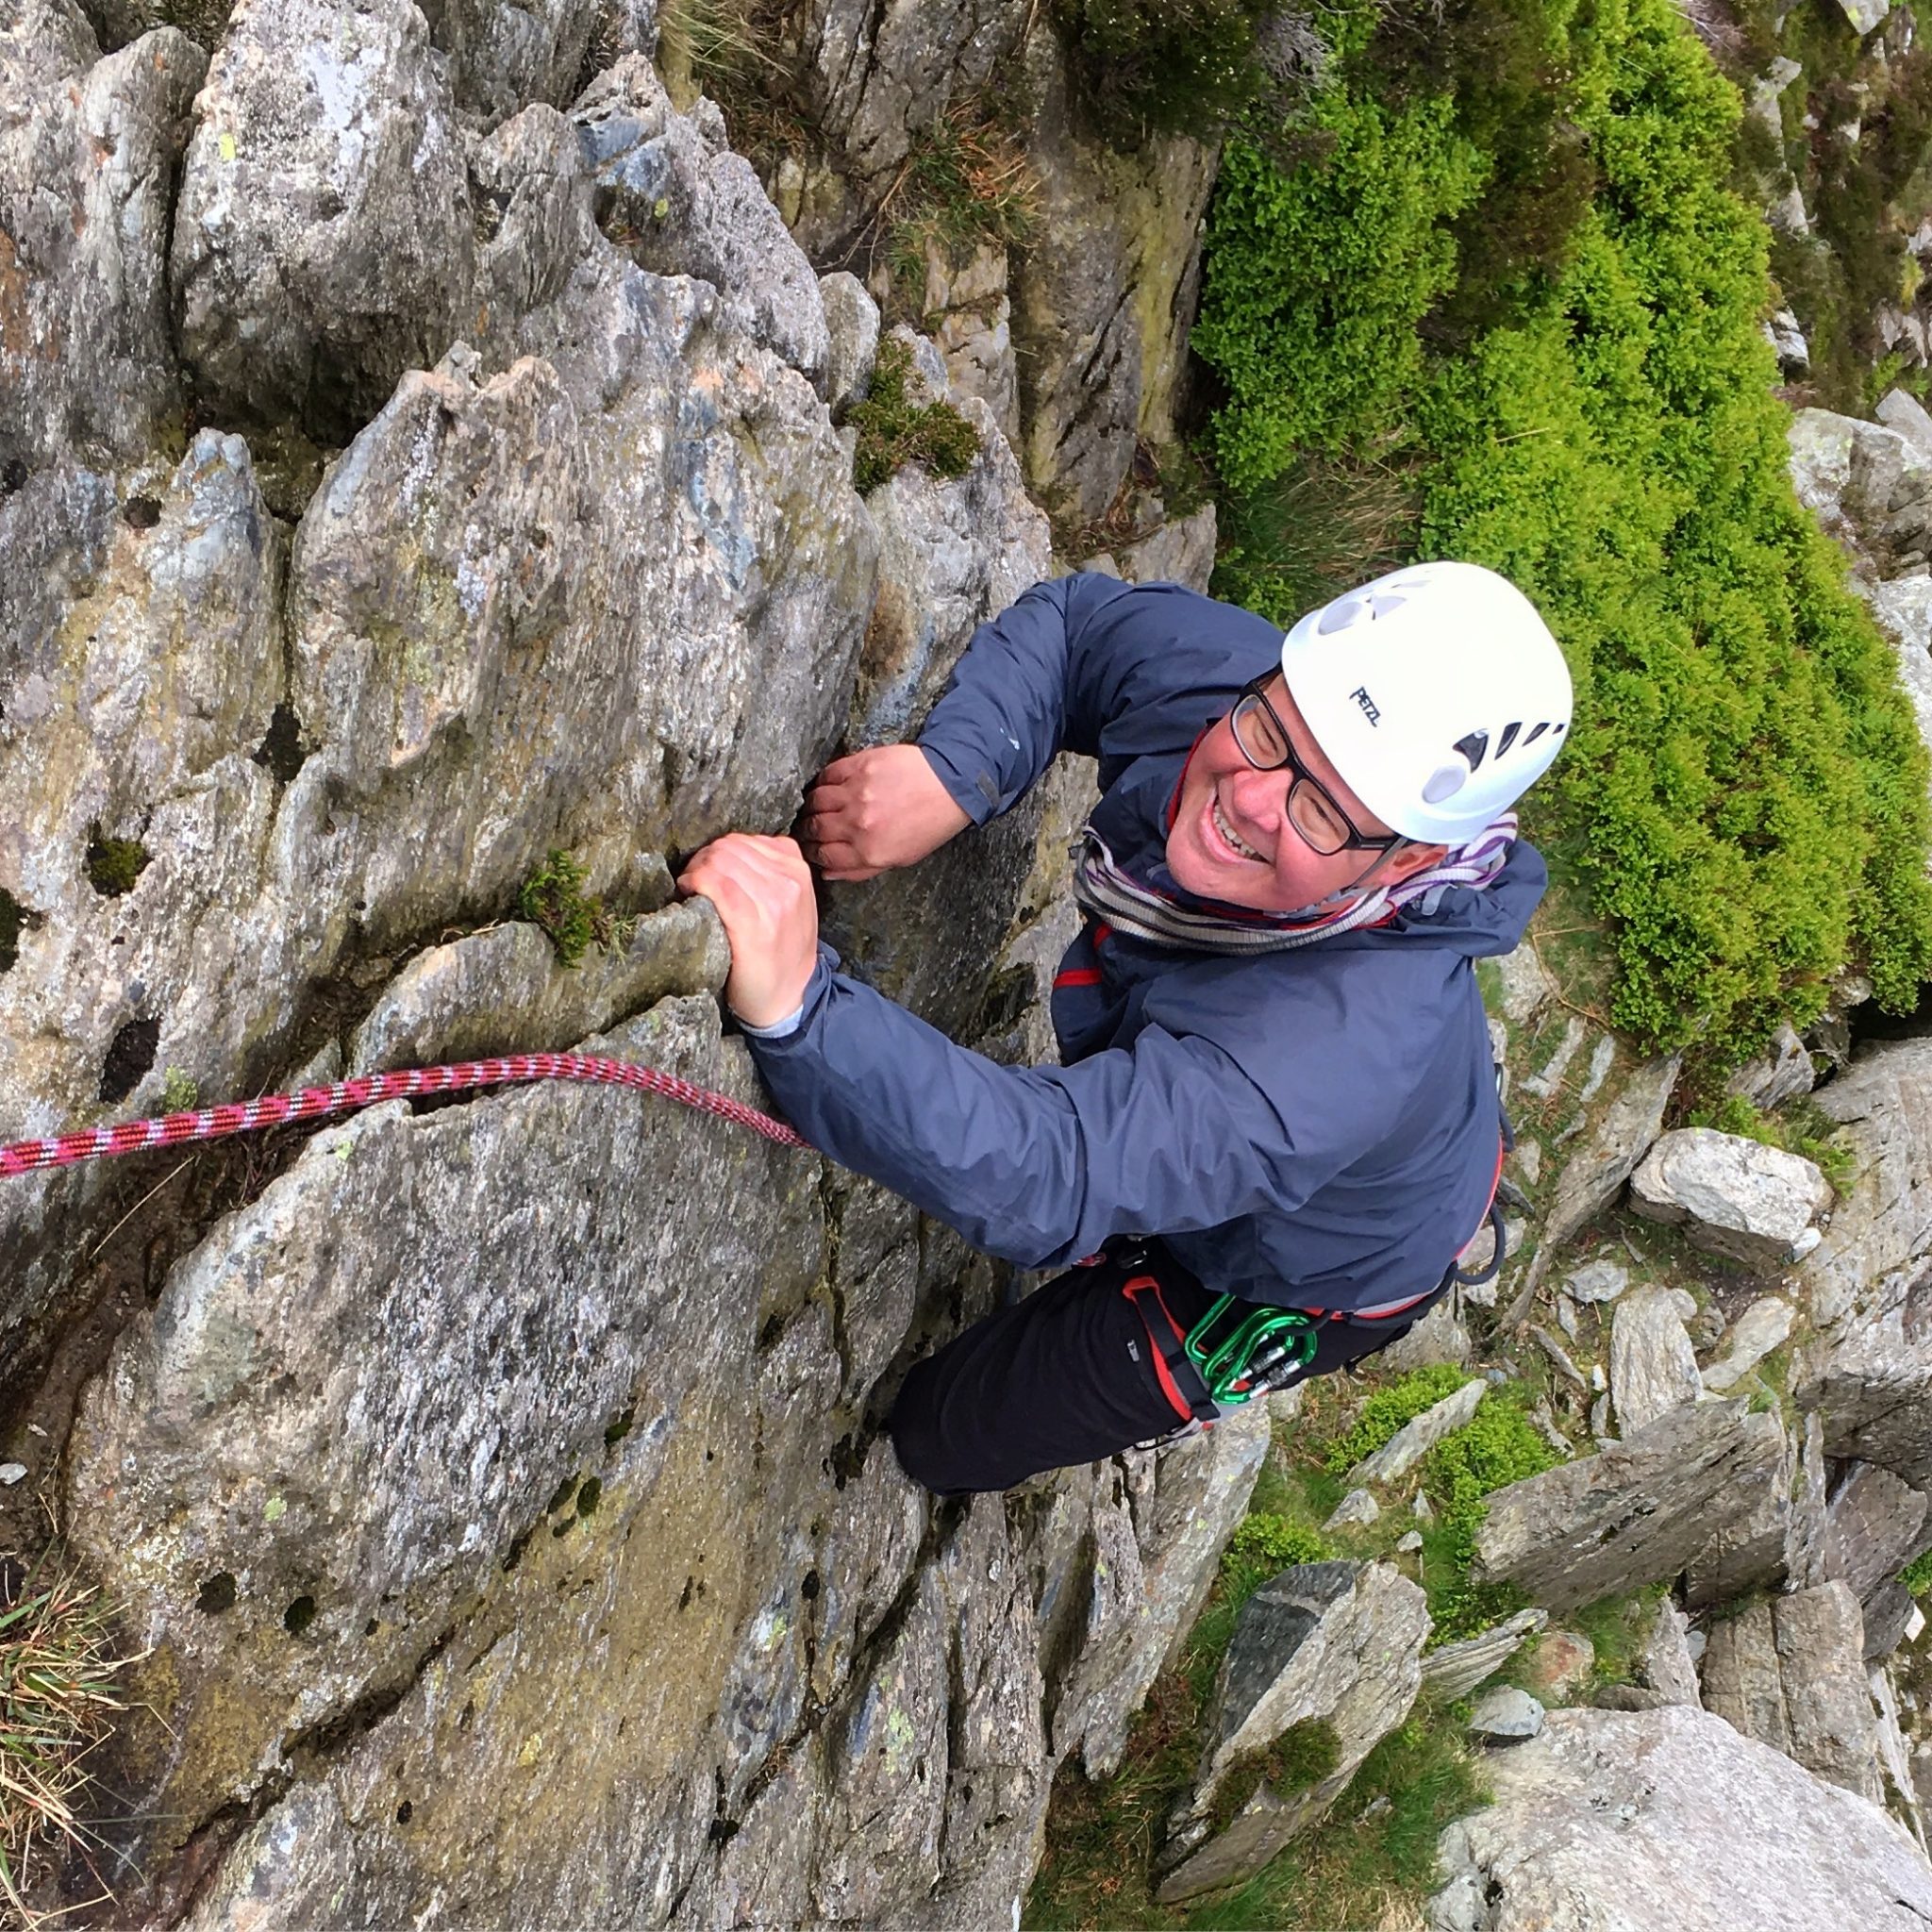 A climber grins as he makes a tricky move during a rock climbing course in Snowdonia